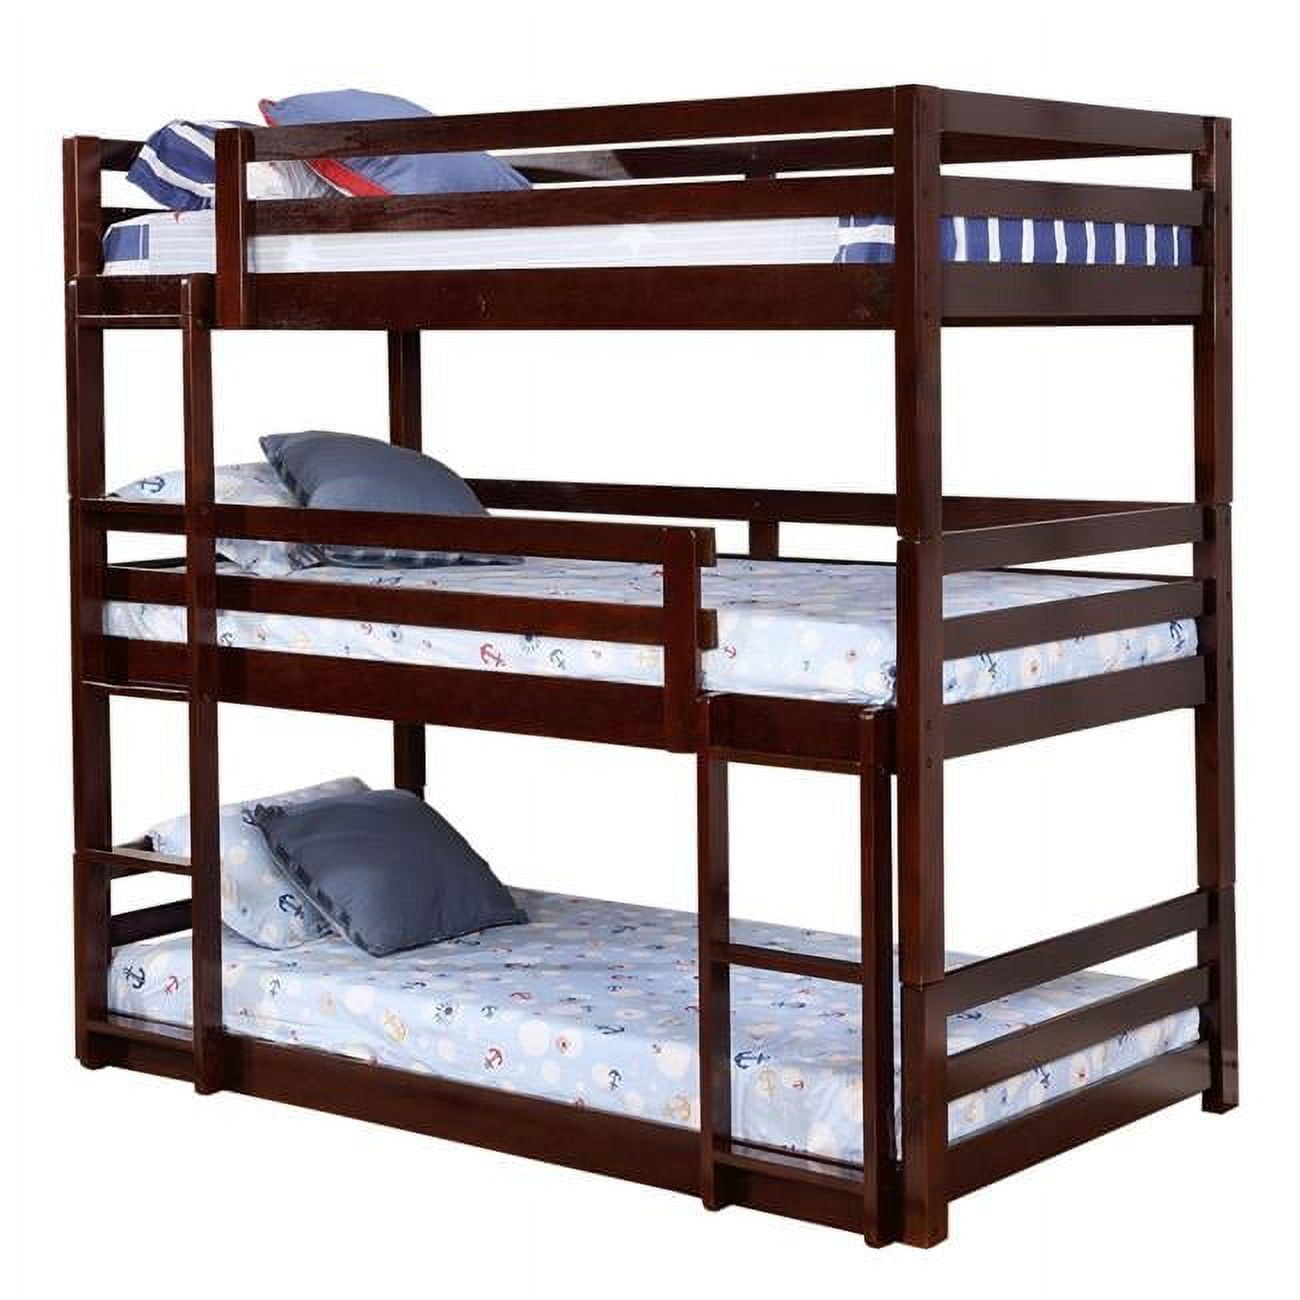 Bm229195 3 Tier Design Wooden Twin Size Bunk Bed With Attached Guardrails, Brown